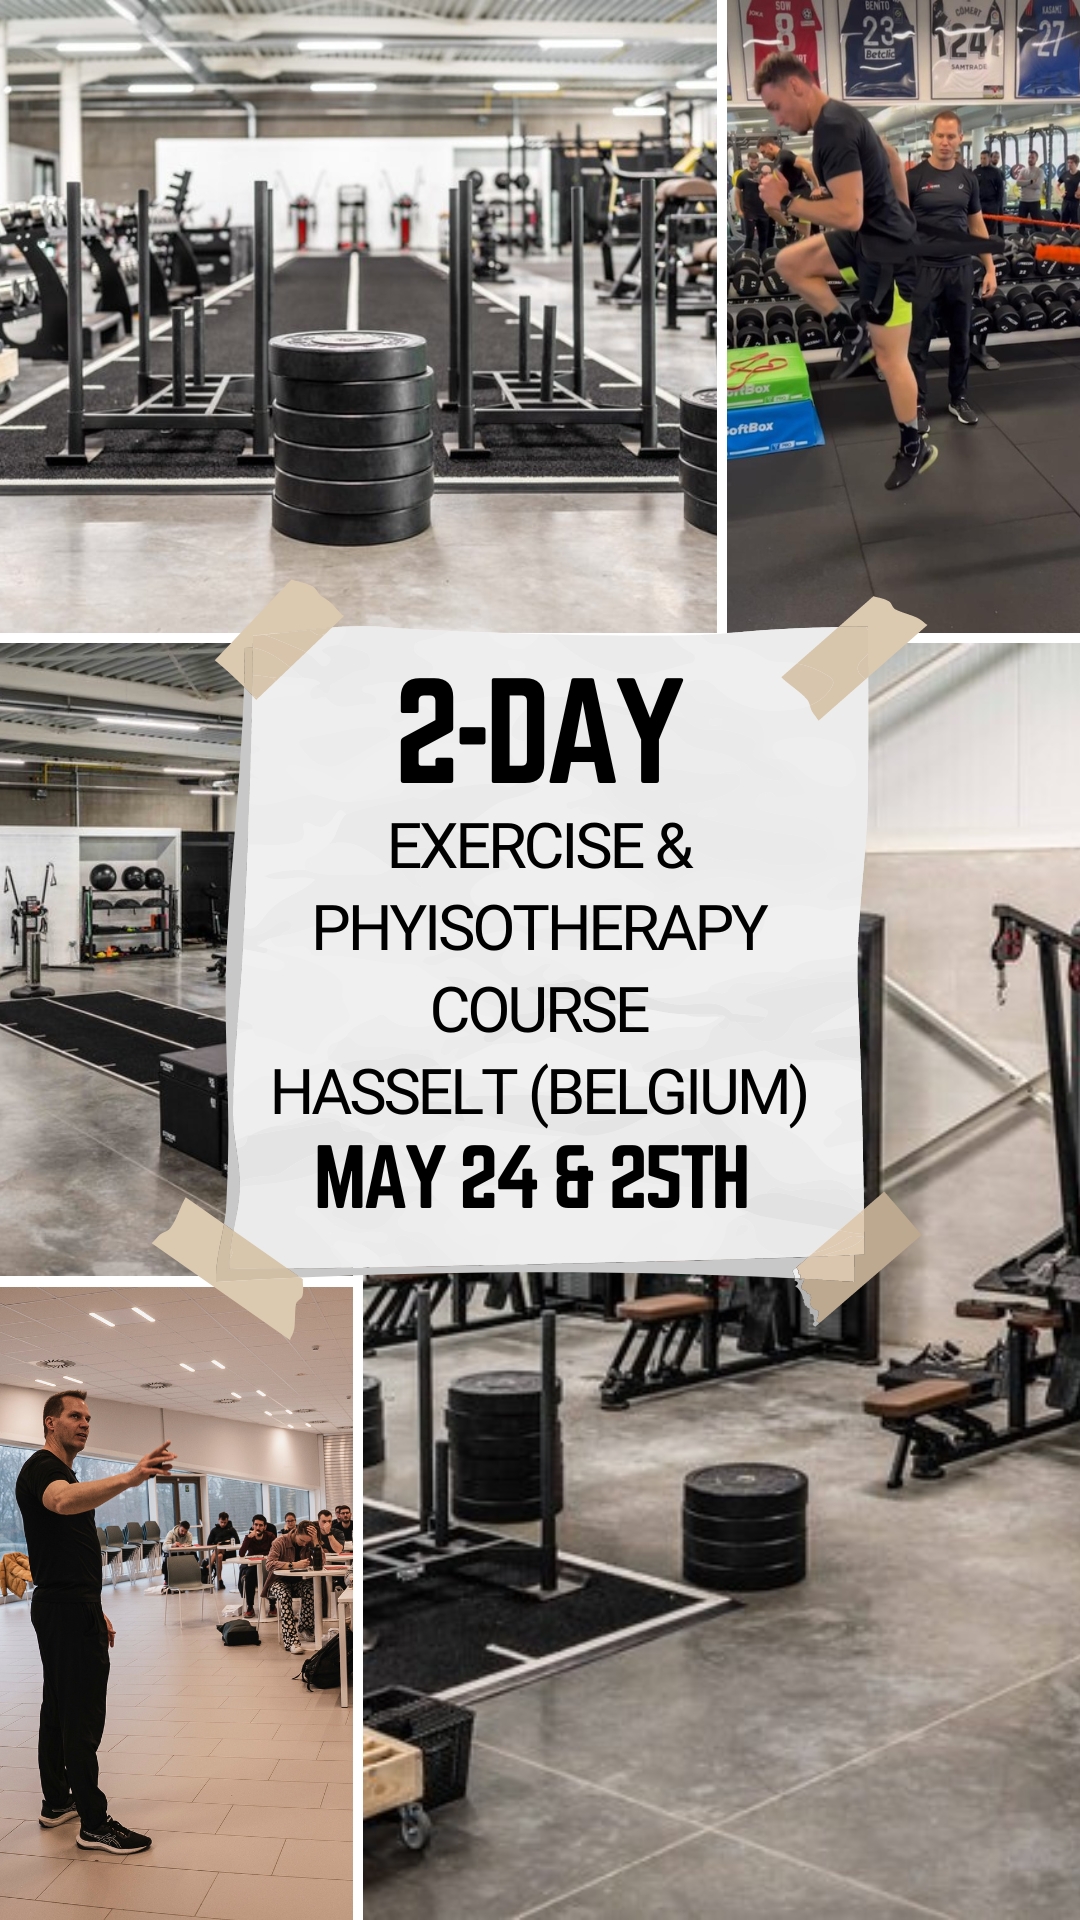 Ticket kopen voor evenement 2-Day Exercise & Physiotherapy Course